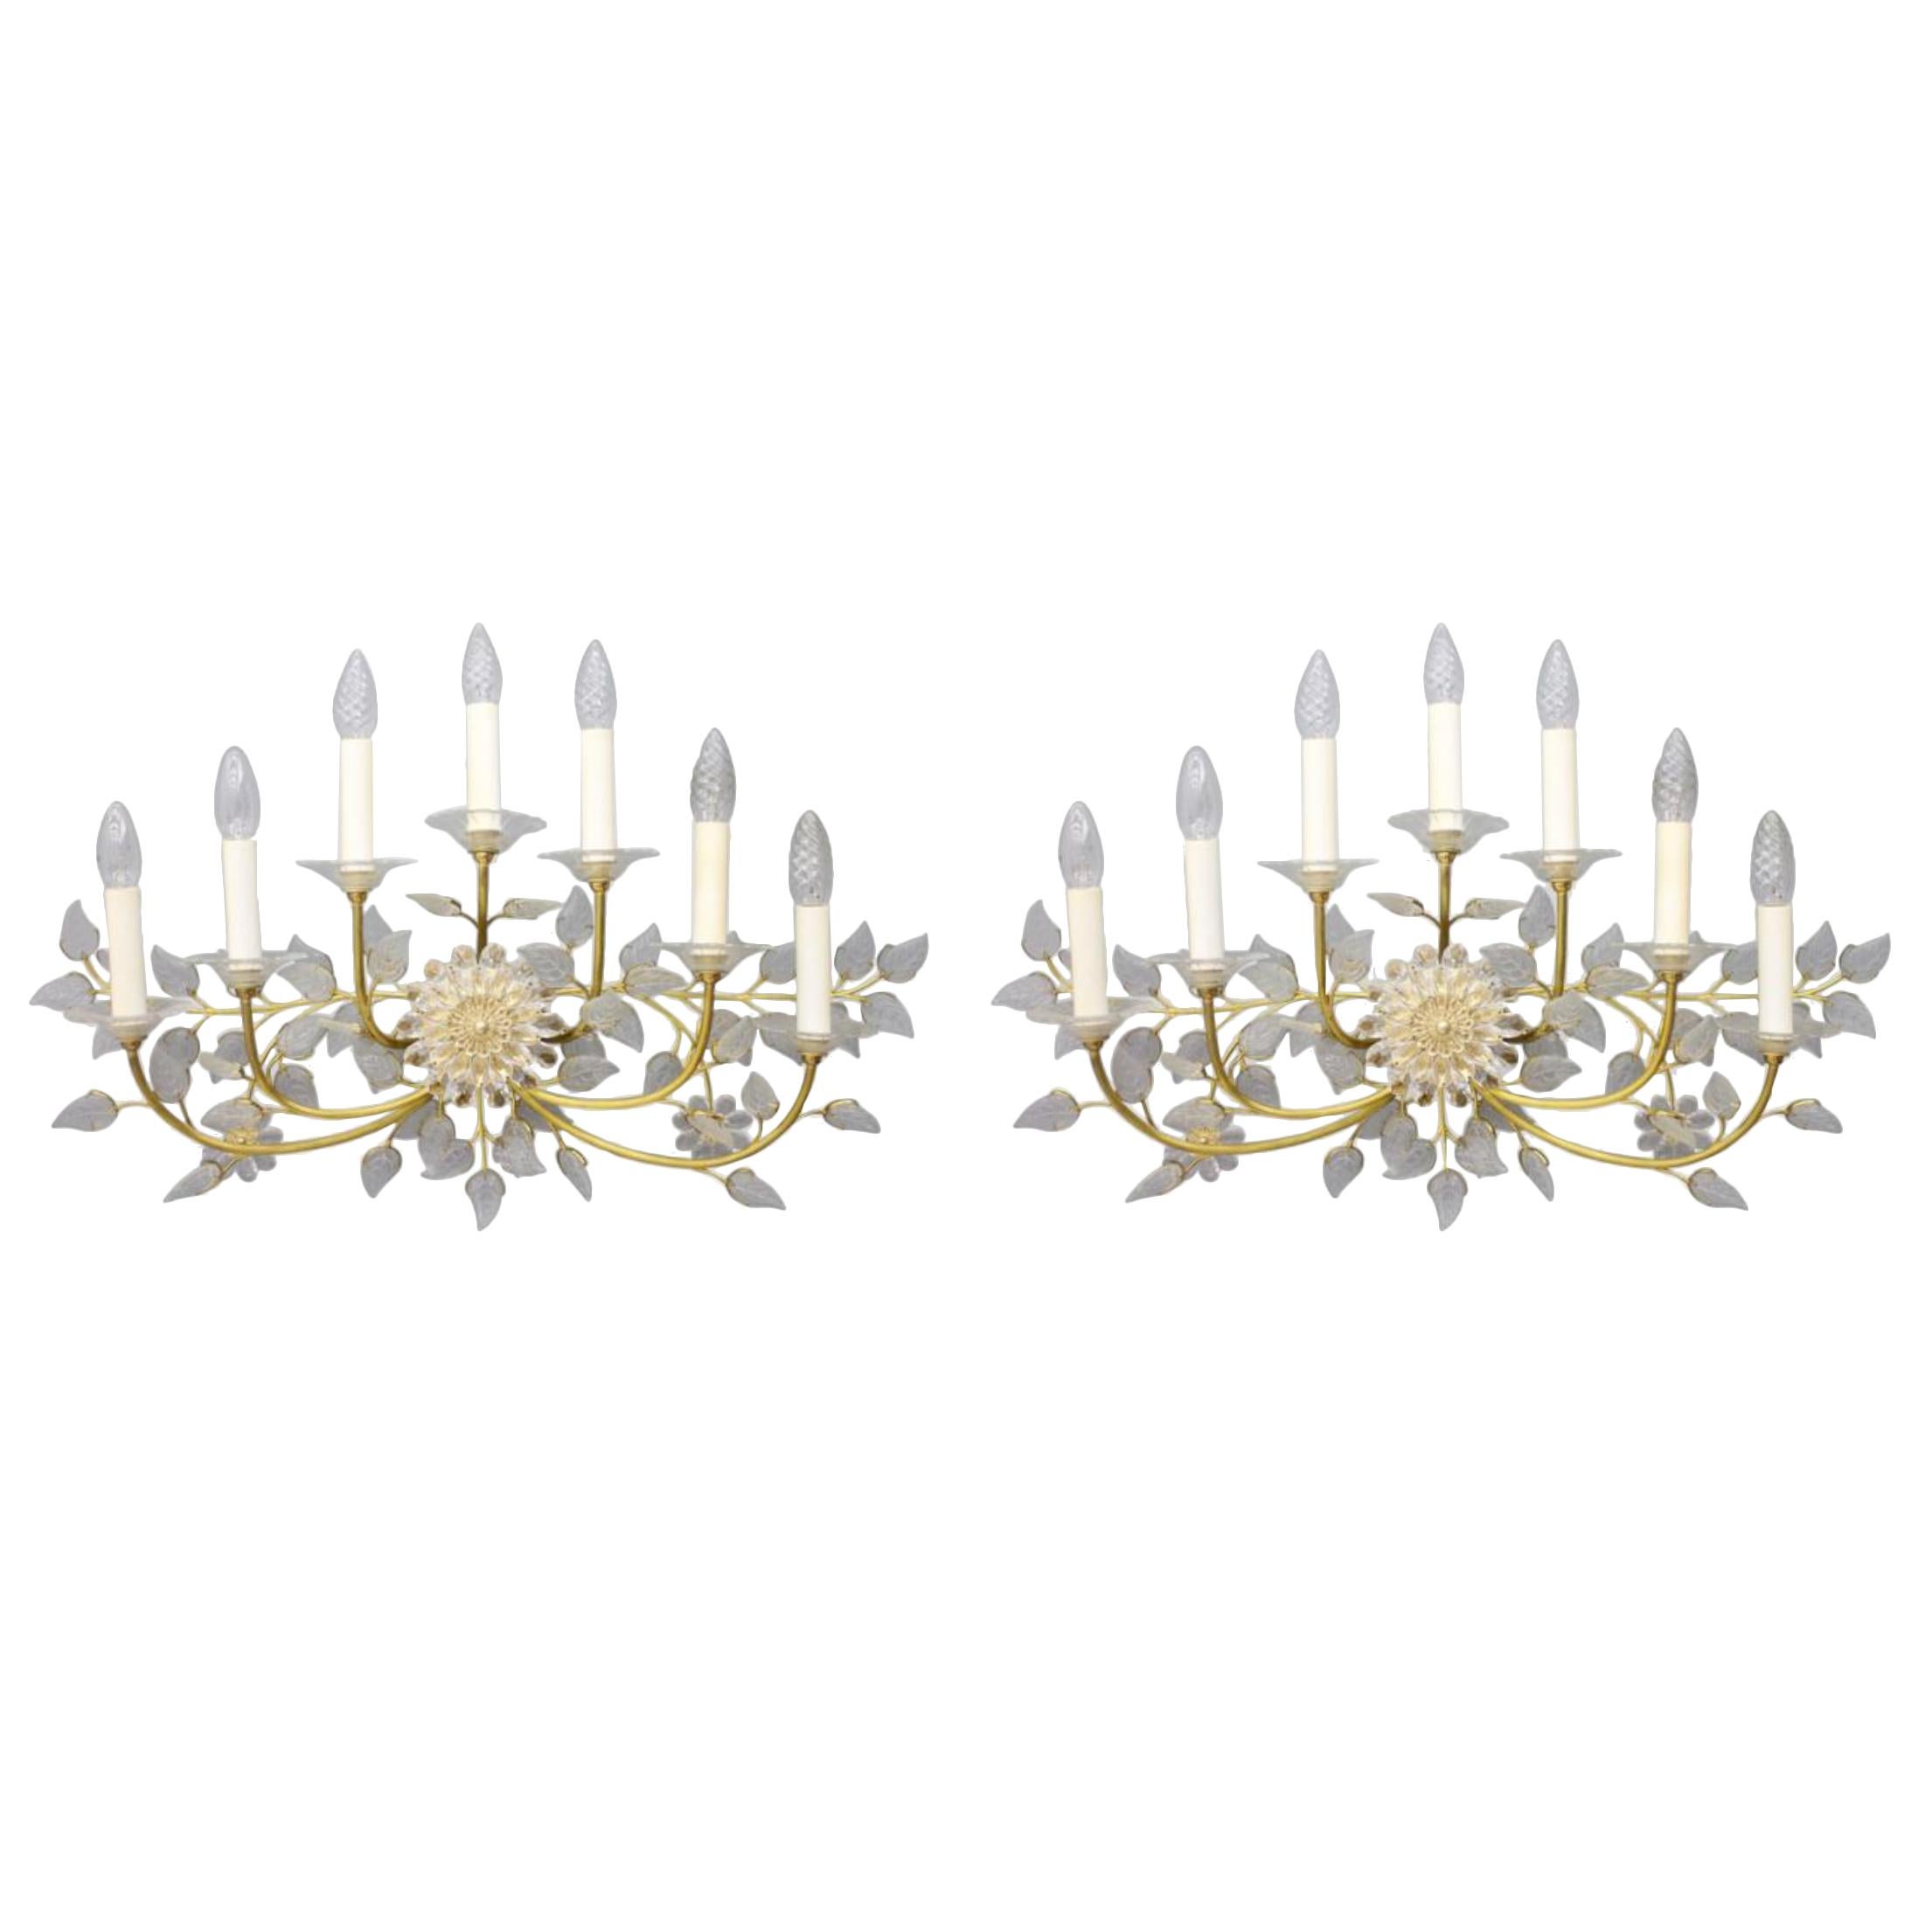 Pair of Palwa Wall Sconces, Lights by Palme & Walter, Germany, 1960s For Sale